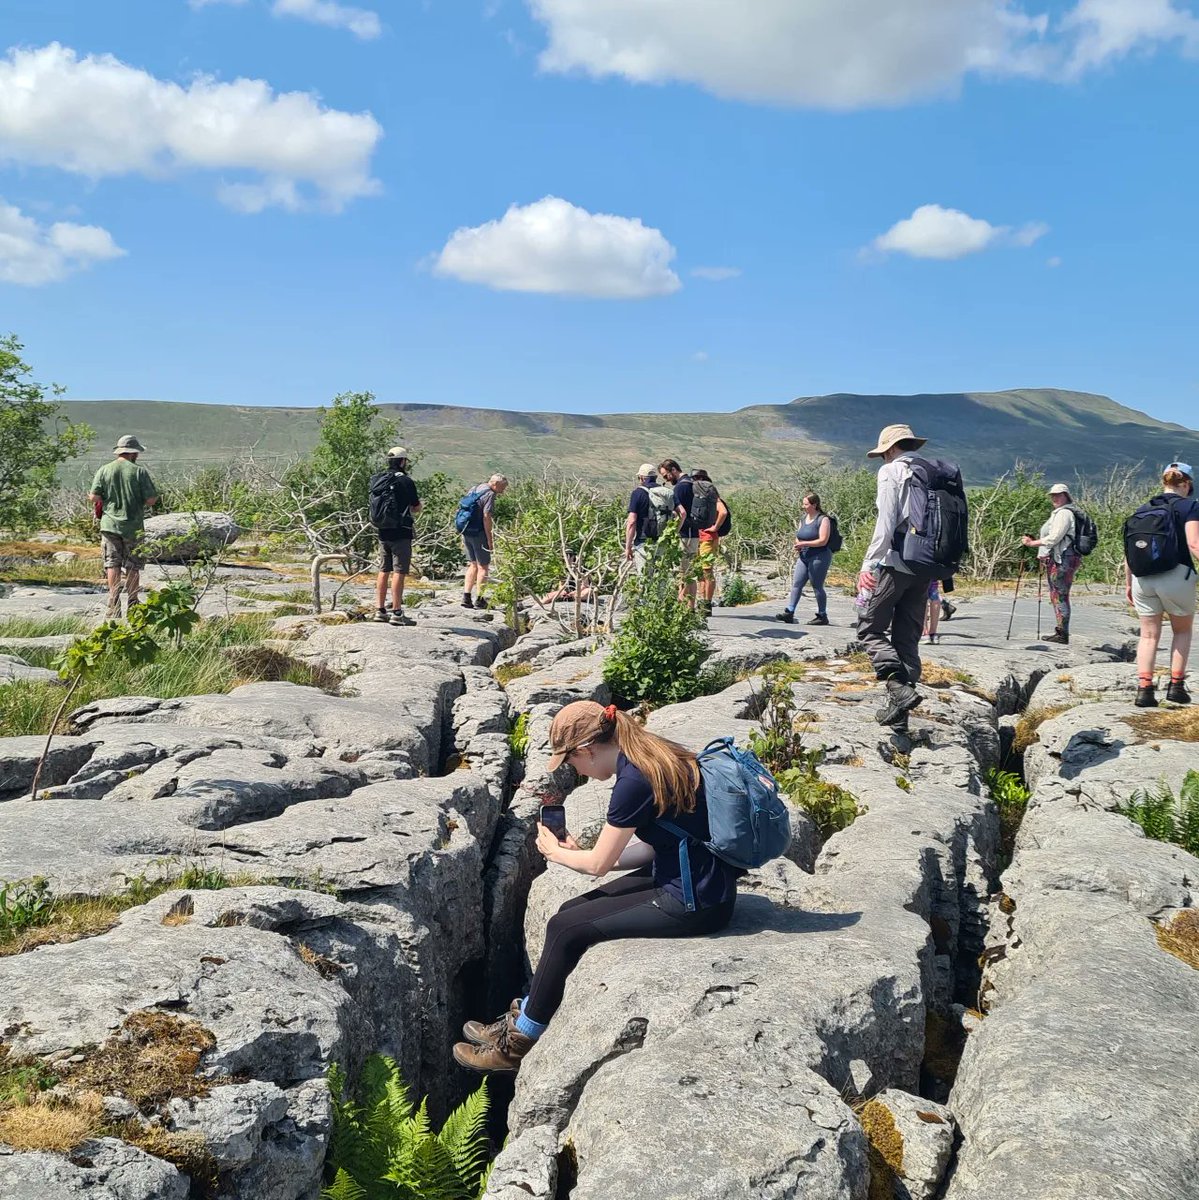 Spent day 22 of #30DaysWild with my herd of nerds, venturing away from our usual peatland habitats and out onto the limestone pavements of Ingleborough.